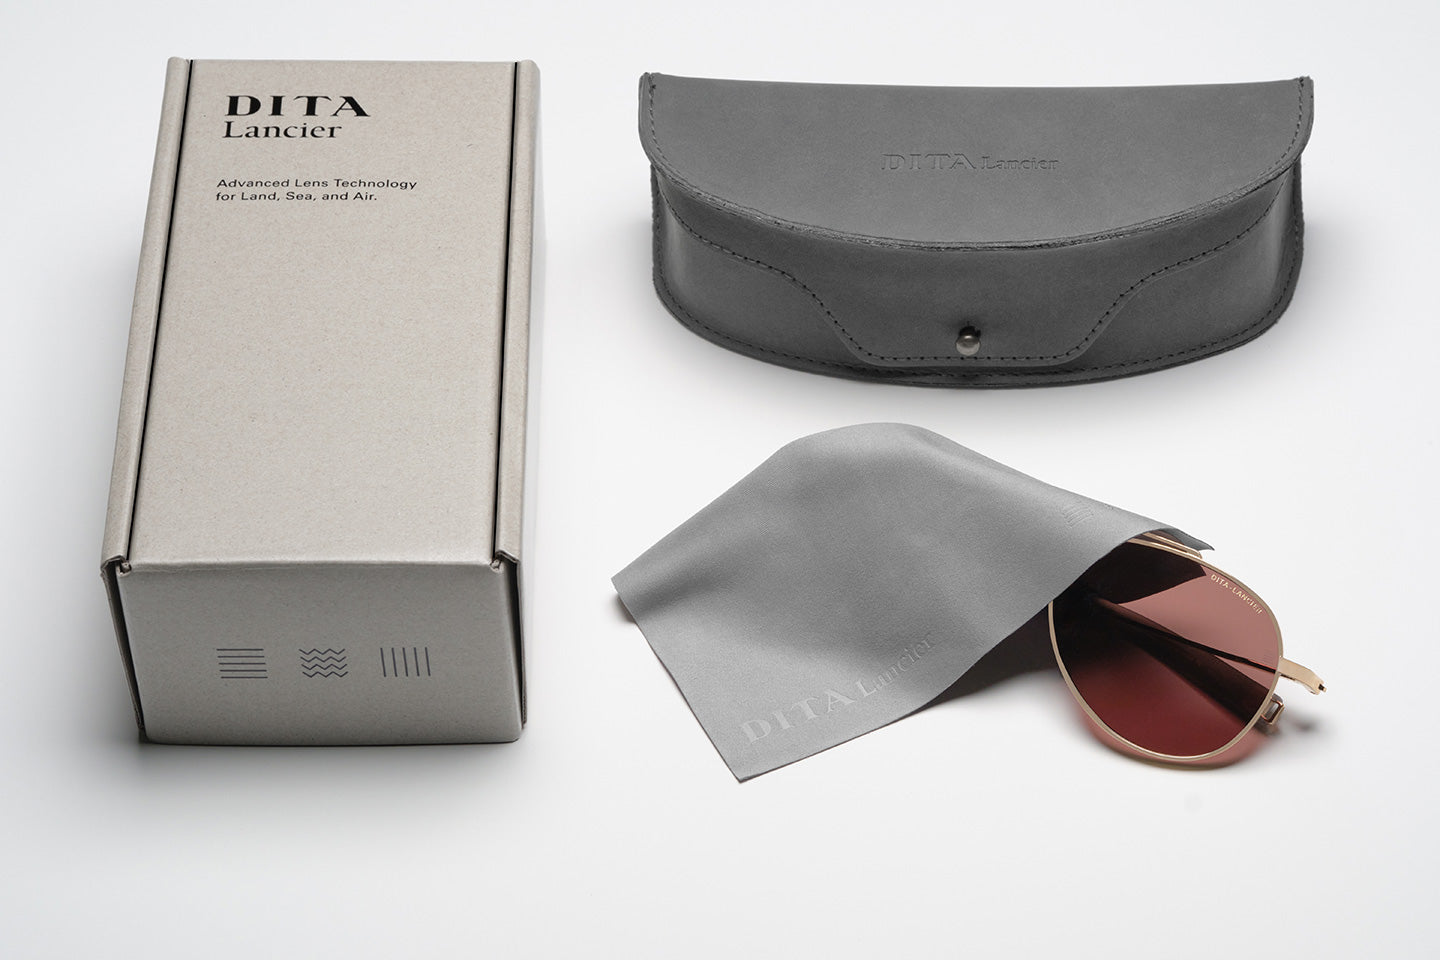 DITA Package Includes